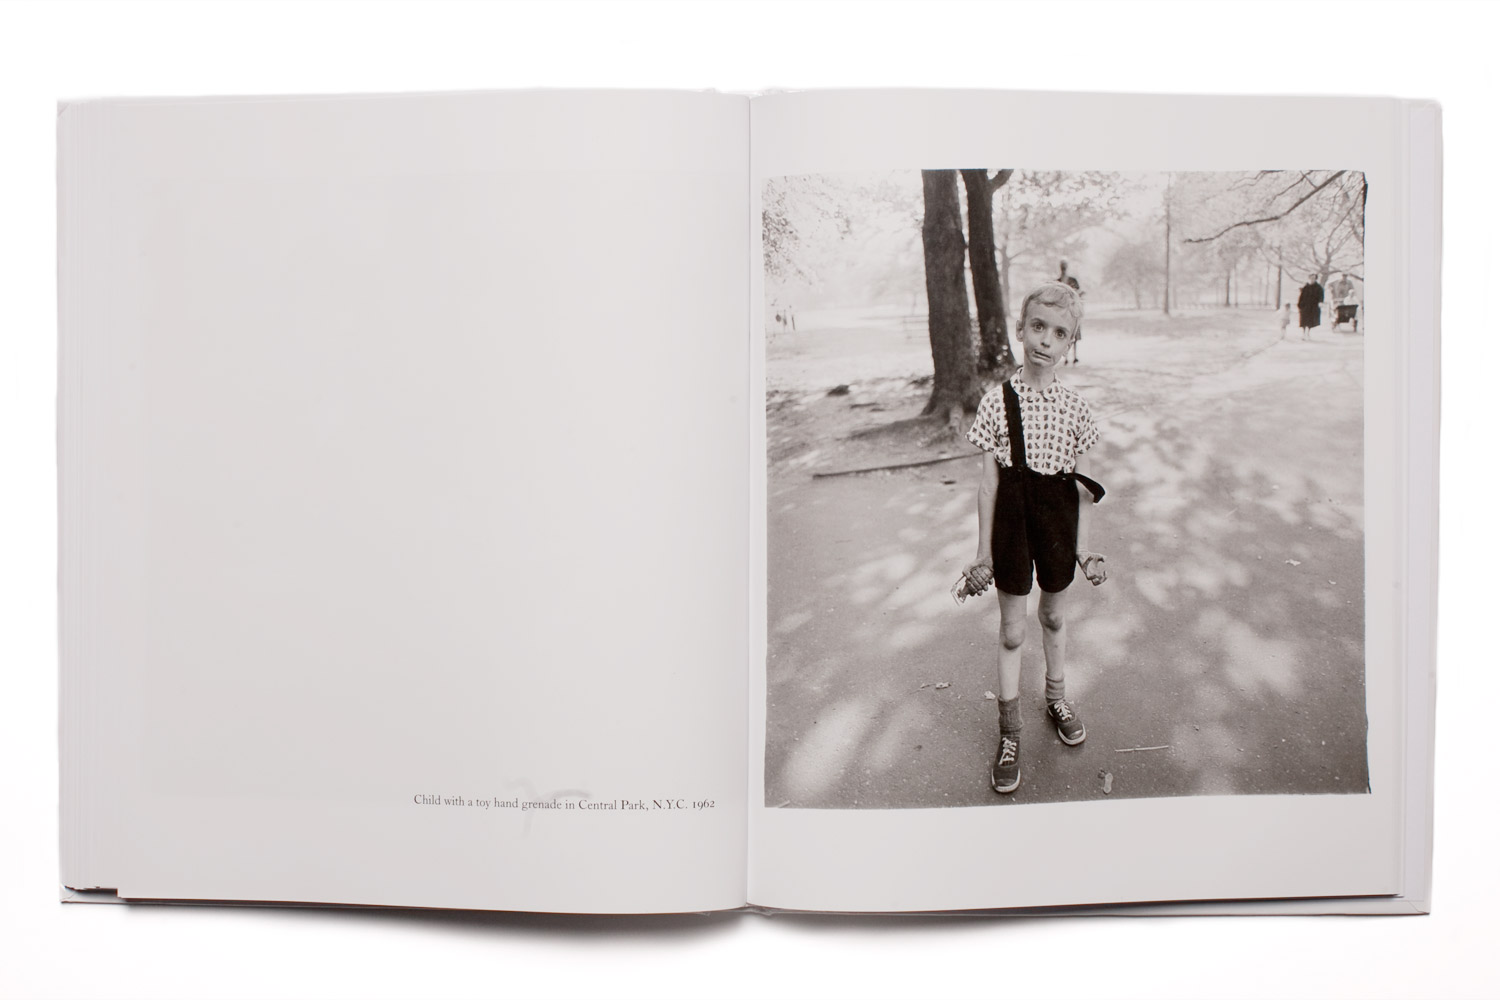 While not all photobooks considered great or groundbreaking will see a reprint, one can hope that enough will exist to maintain a full sense of photobook history.